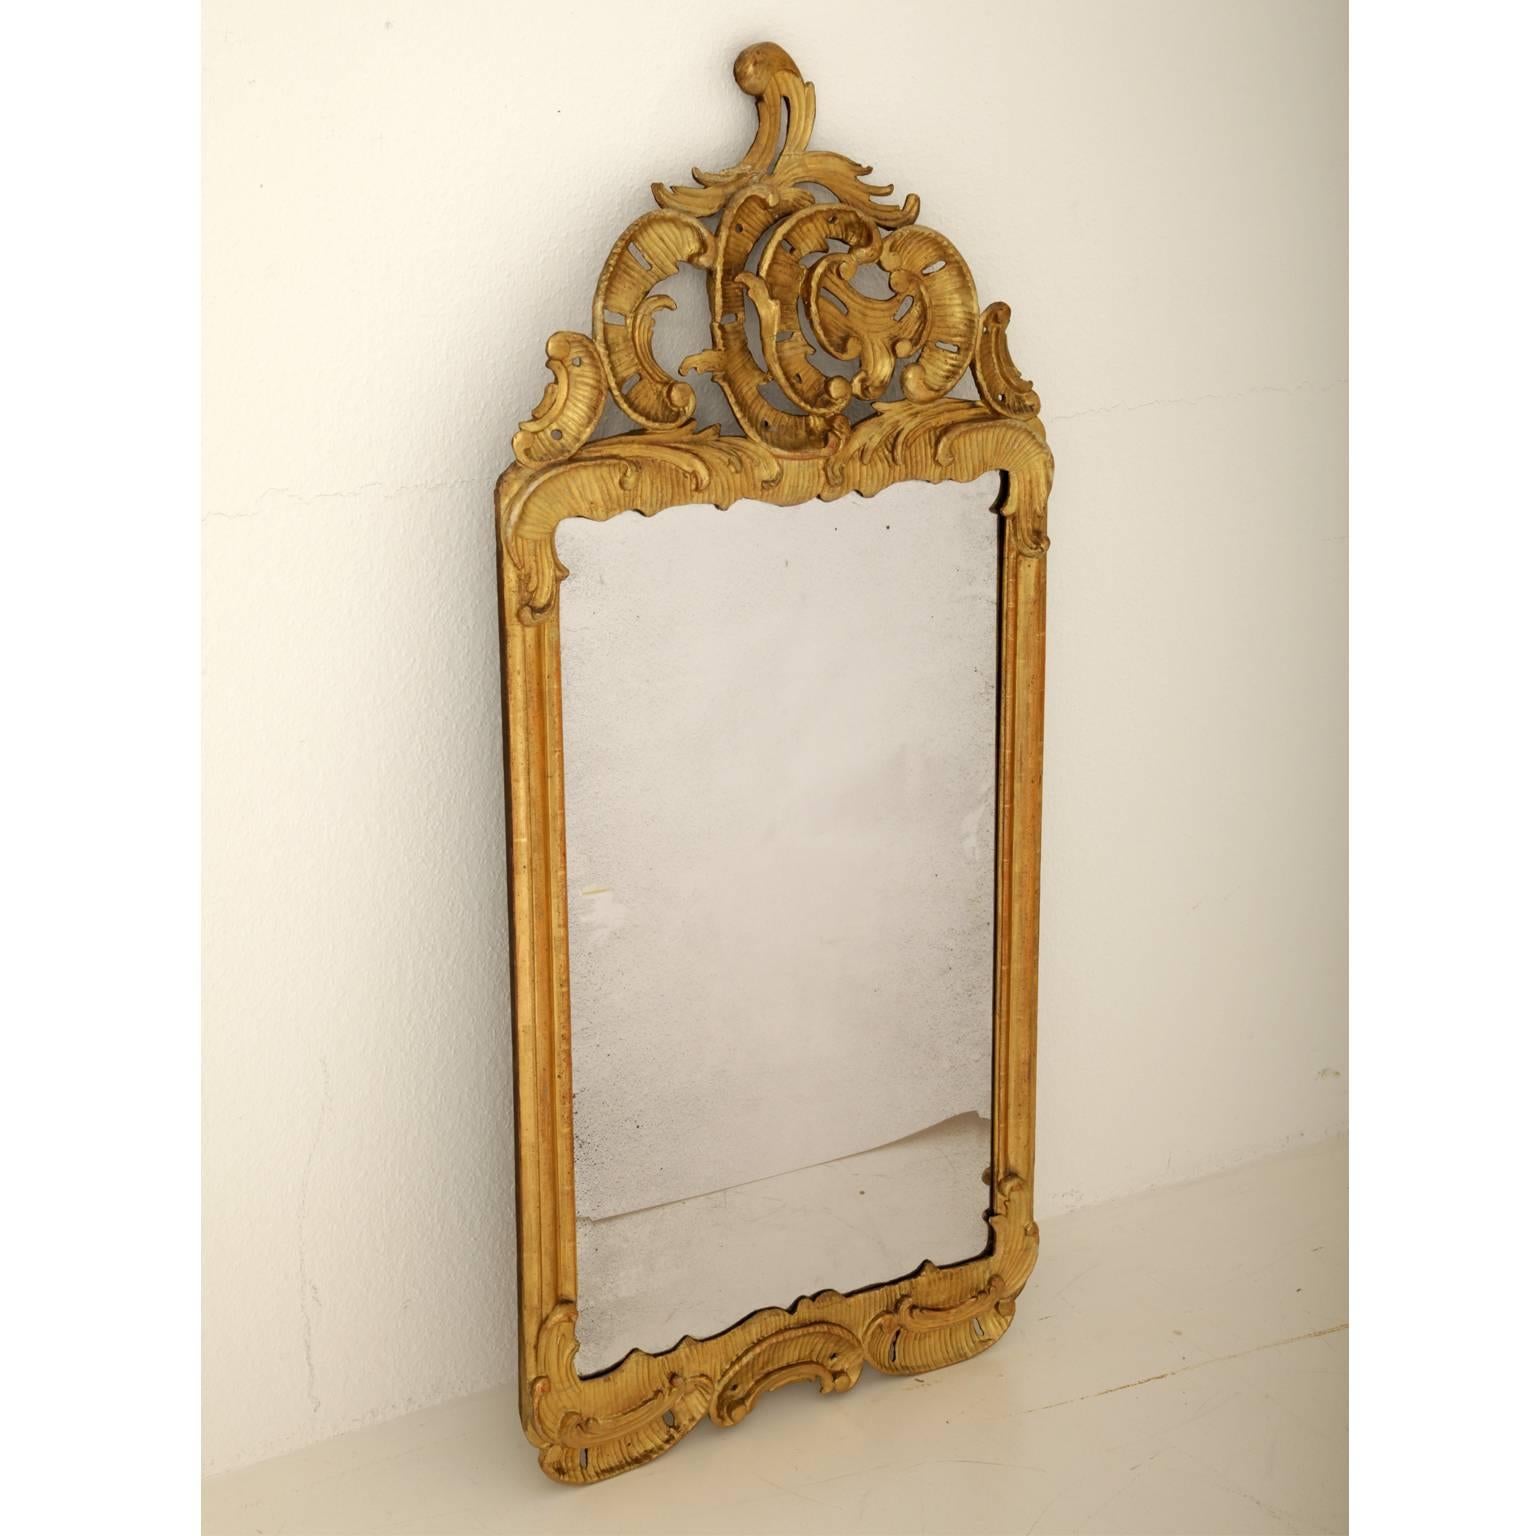 Gilded wall mirror with asymmetrical rocaille decor. The mirror pane is slightly spotted.